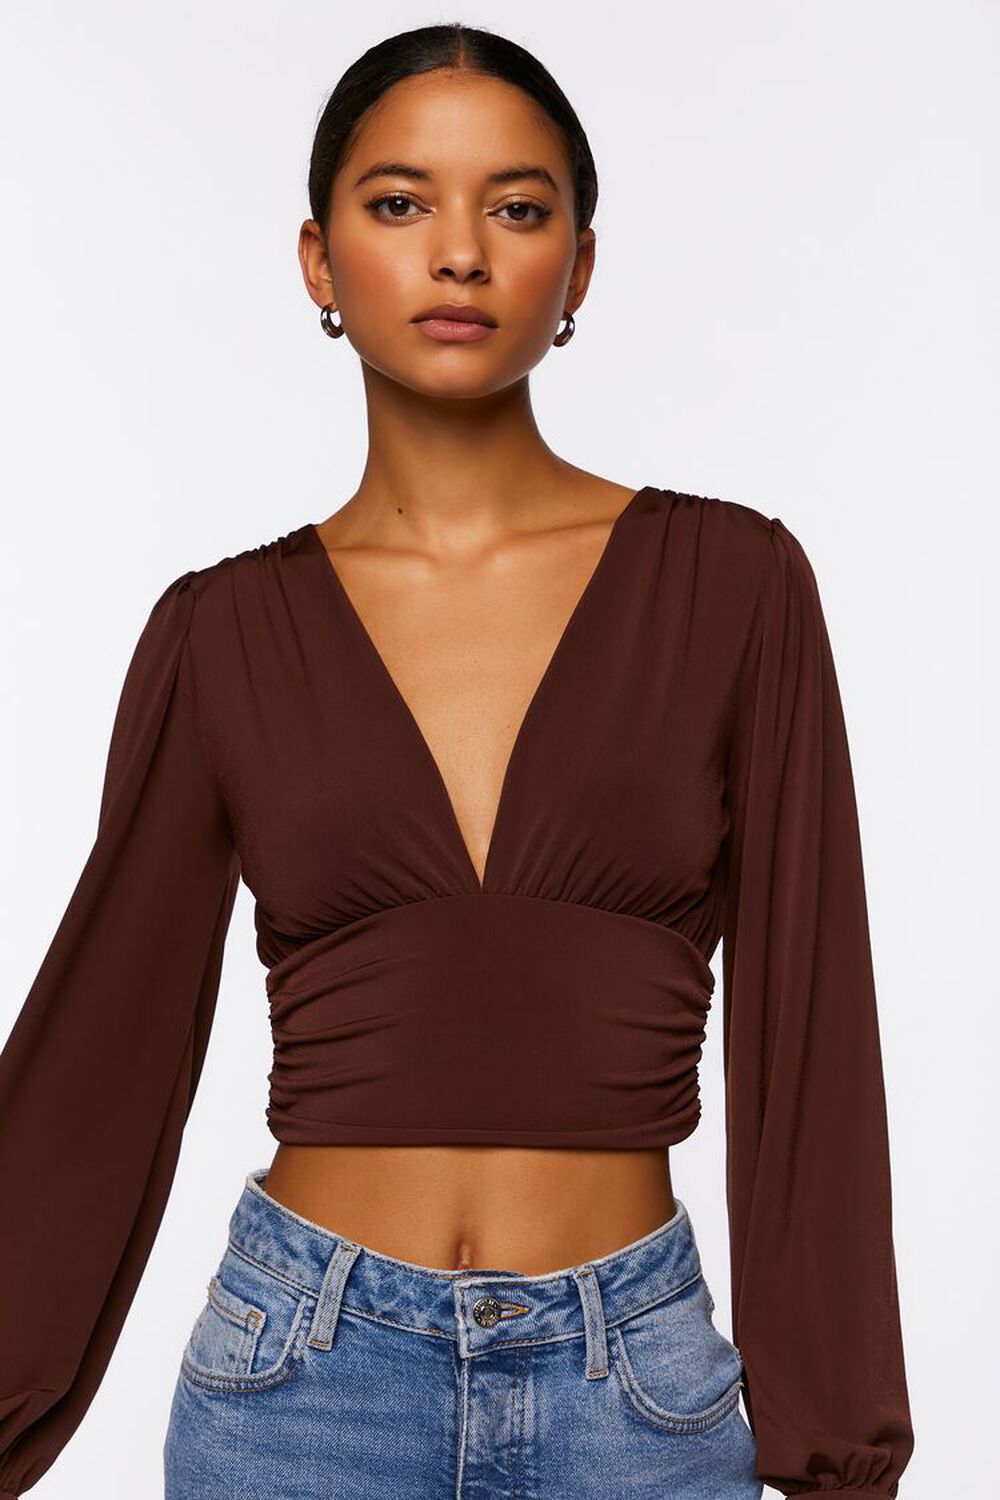 CHOCOLATE Plunging Shirred Crop Top, image 1